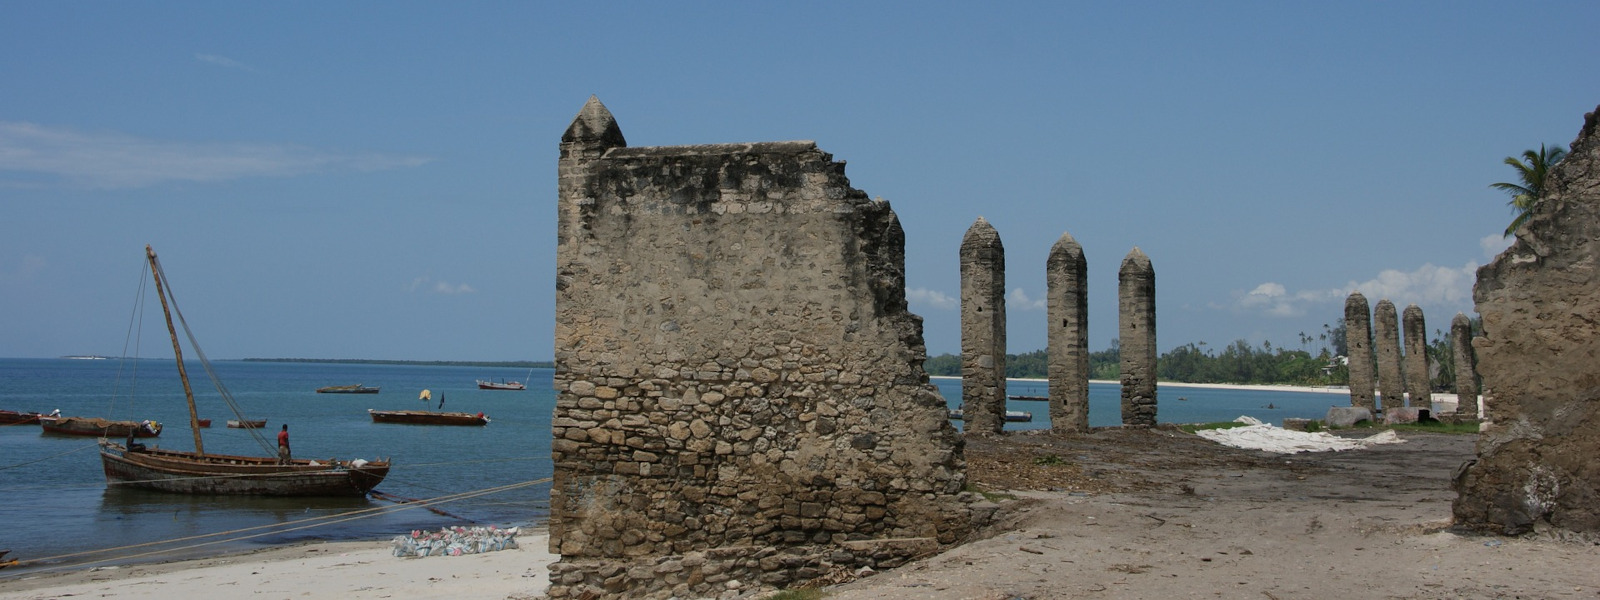 Bagamoyo played various historical roles in Tanzania.